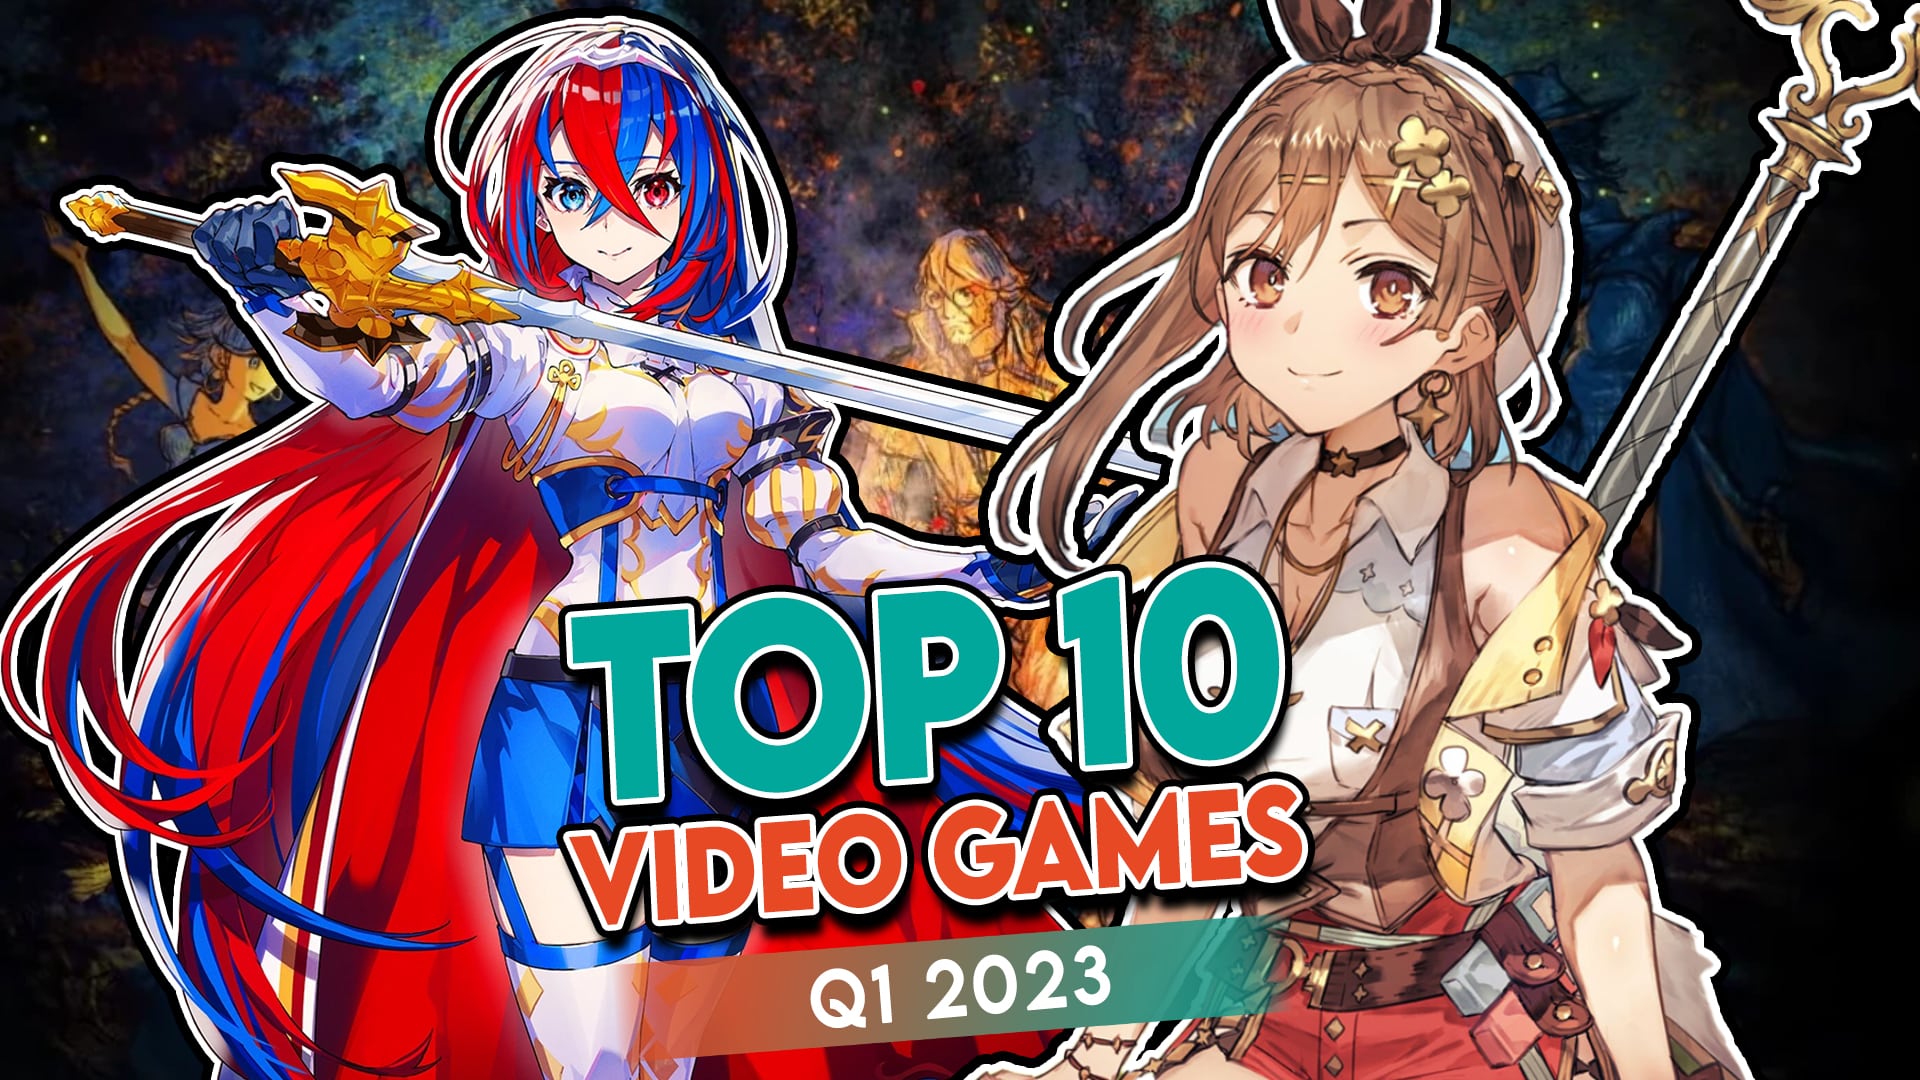 10 Best Friv Online Games 2023 - Top and Trending